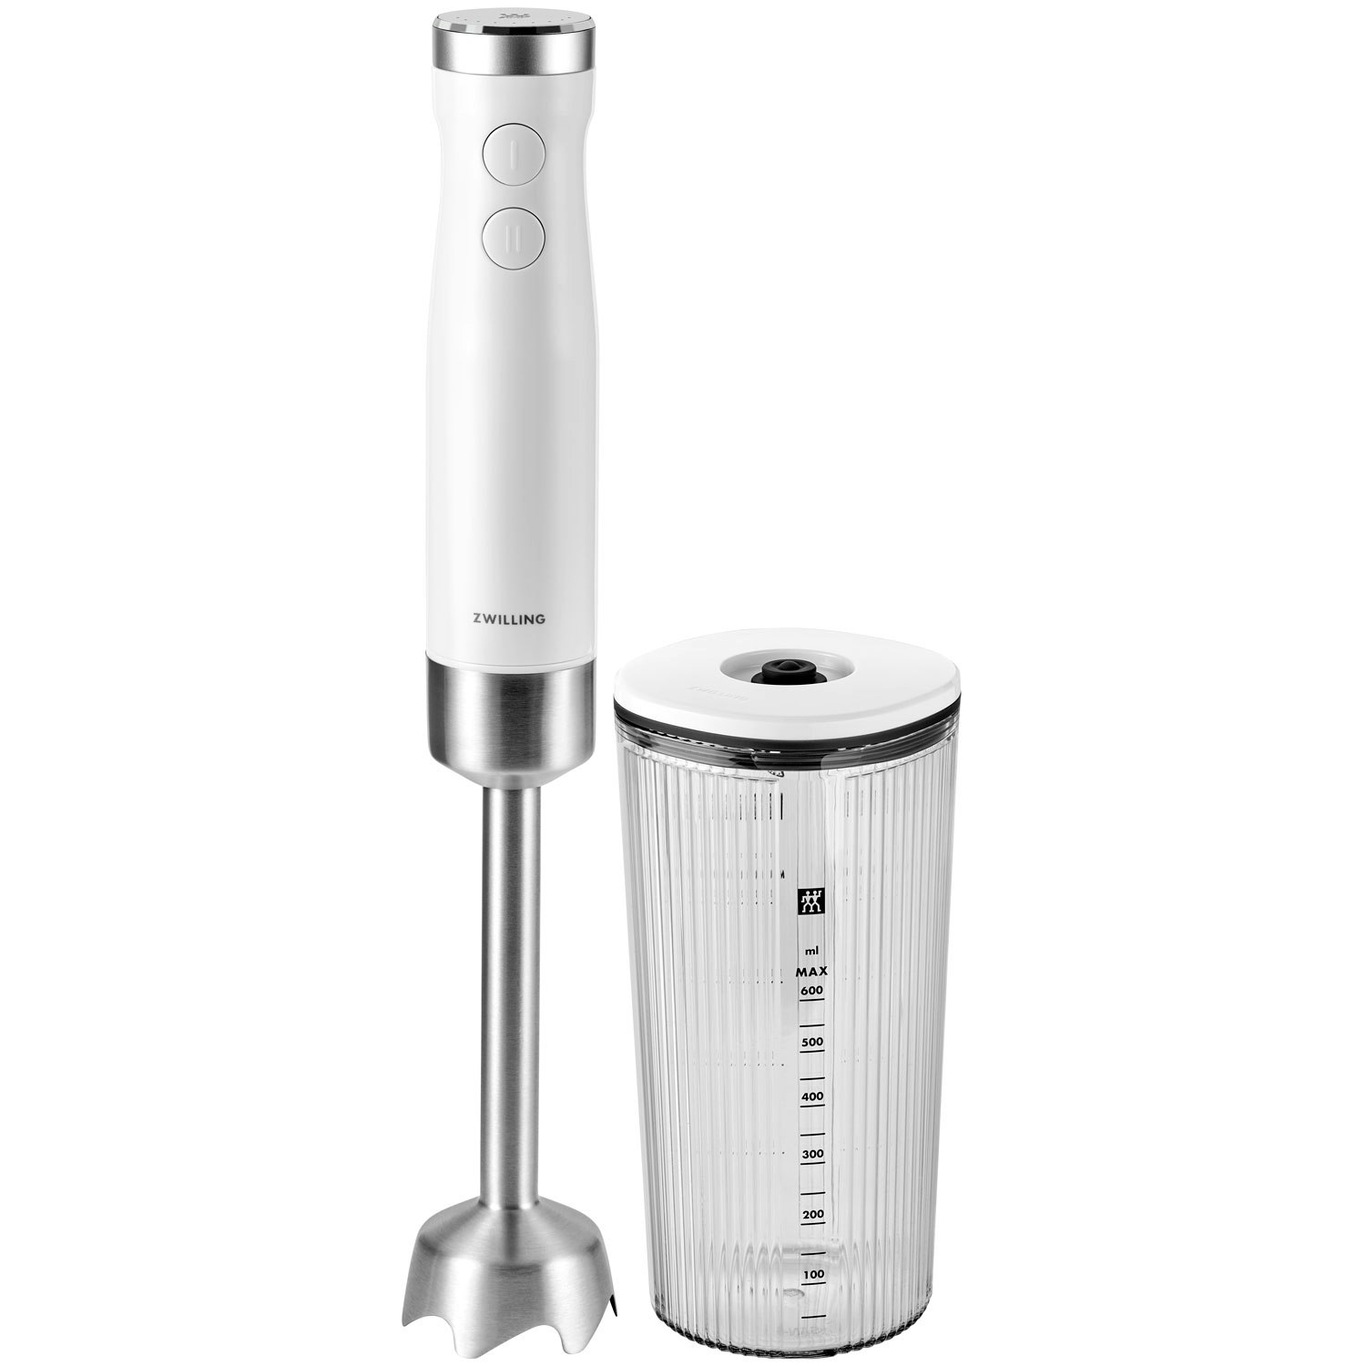 Buy ZWILLING Enfinigy Blender accessories